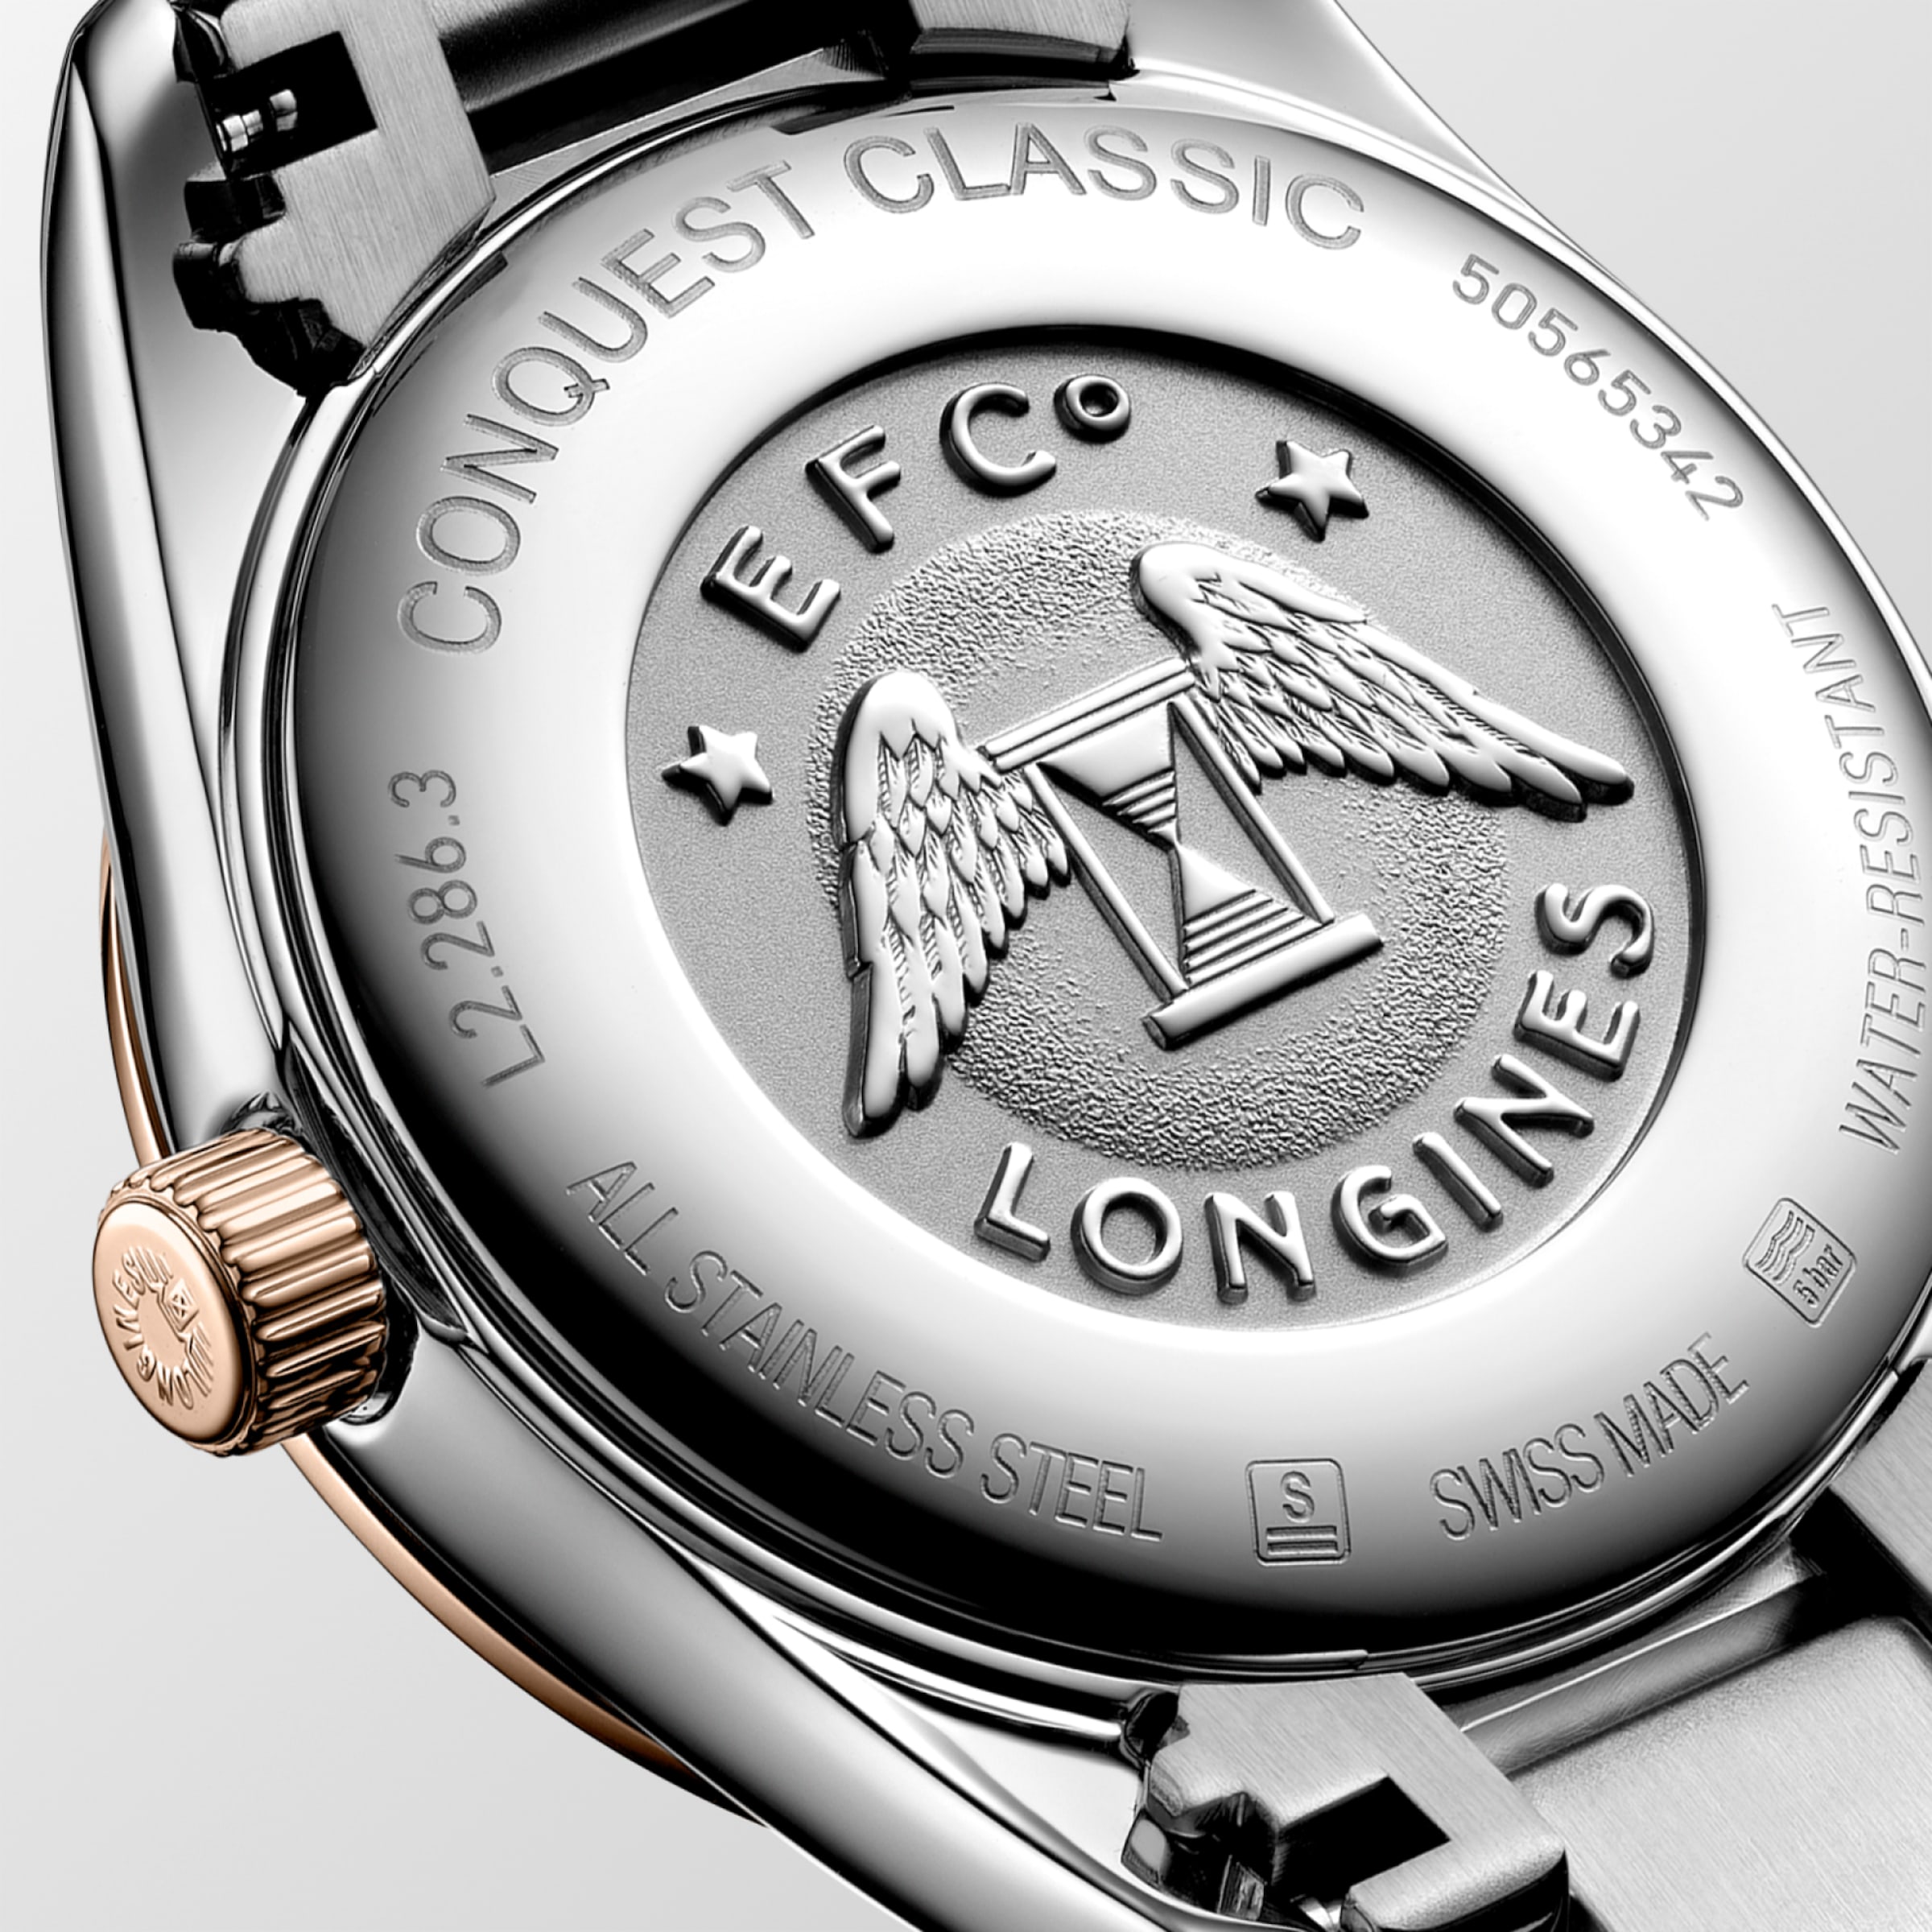 Longines CONQUEST CLASSIC Quartz Stainless steel and red PVD coating Watch - L2.286.3.72.7